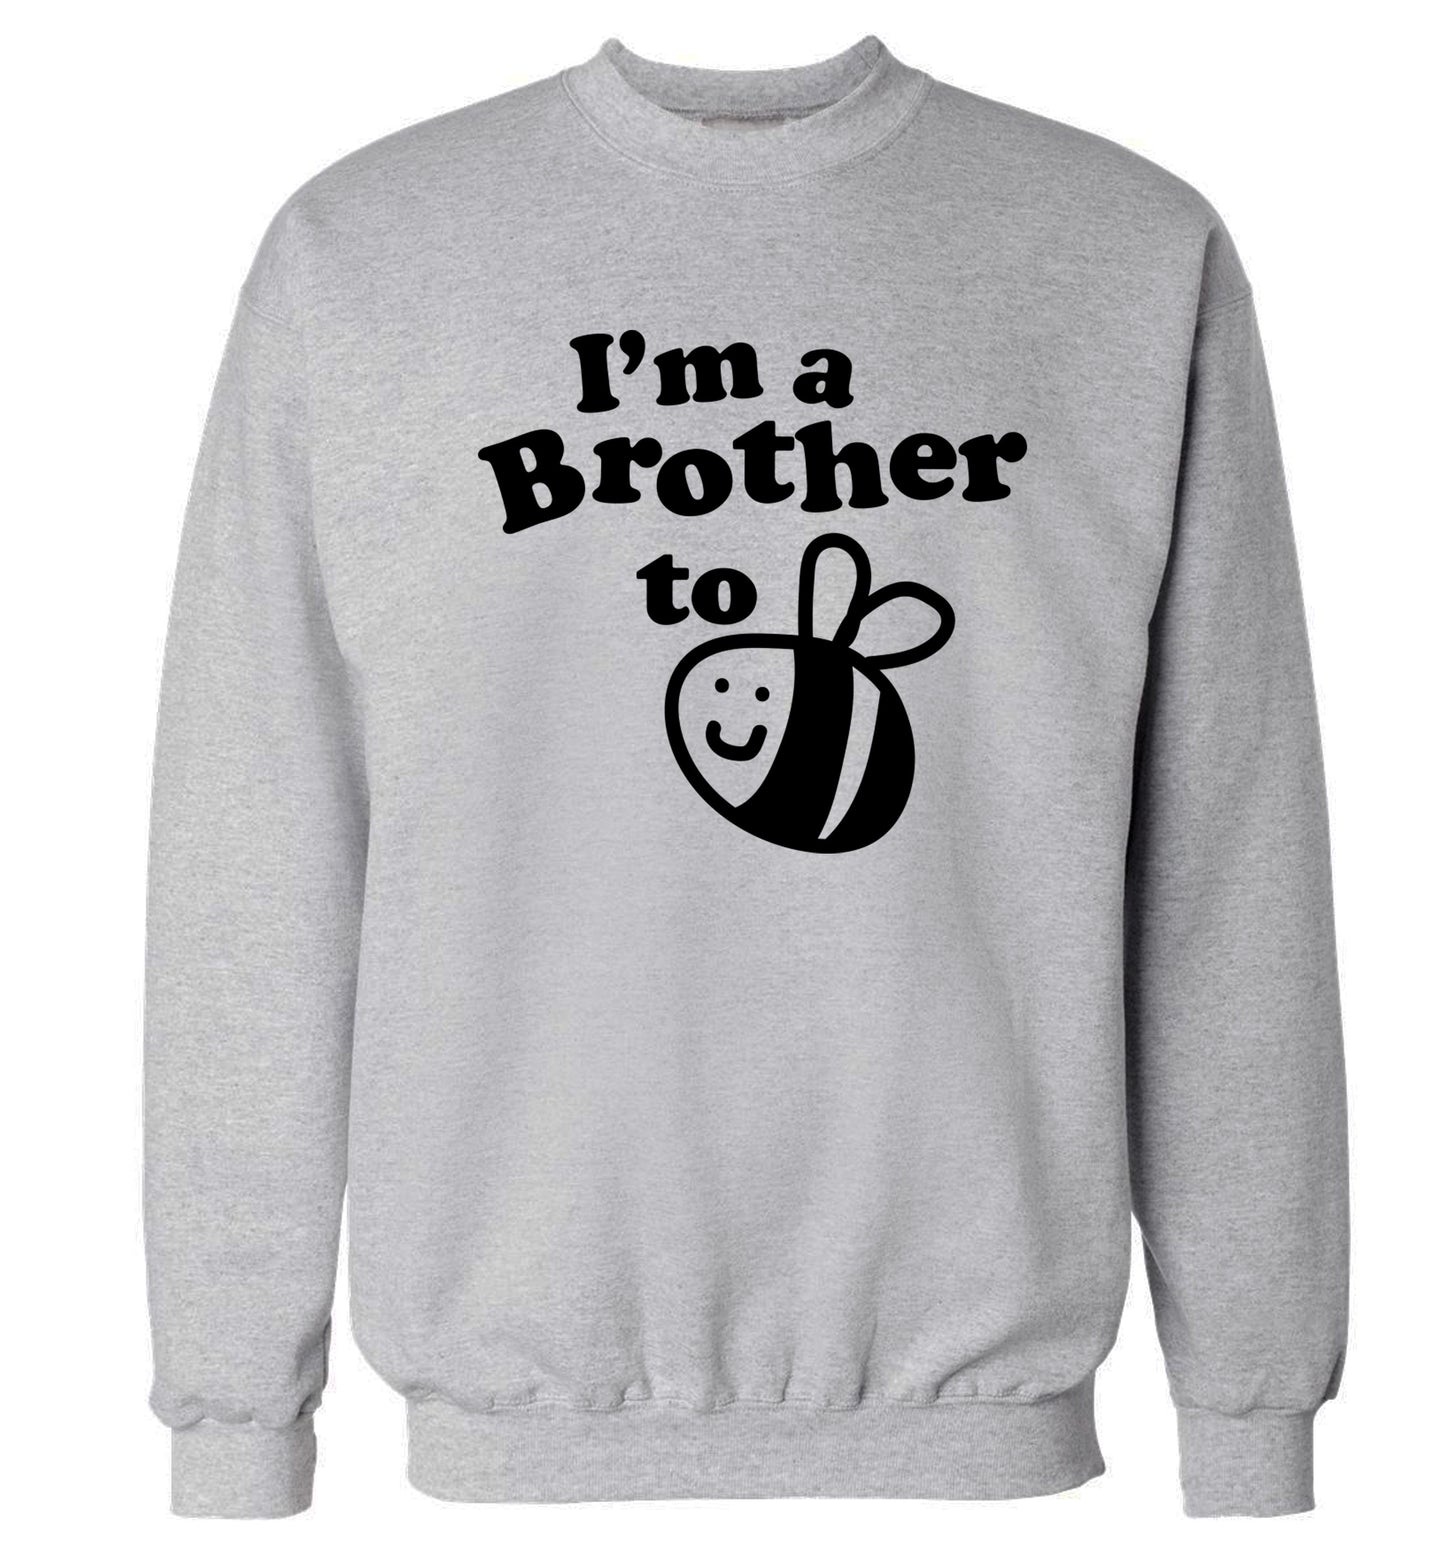 I'm a brother to be Adult's unisex grey Sweater 2XL